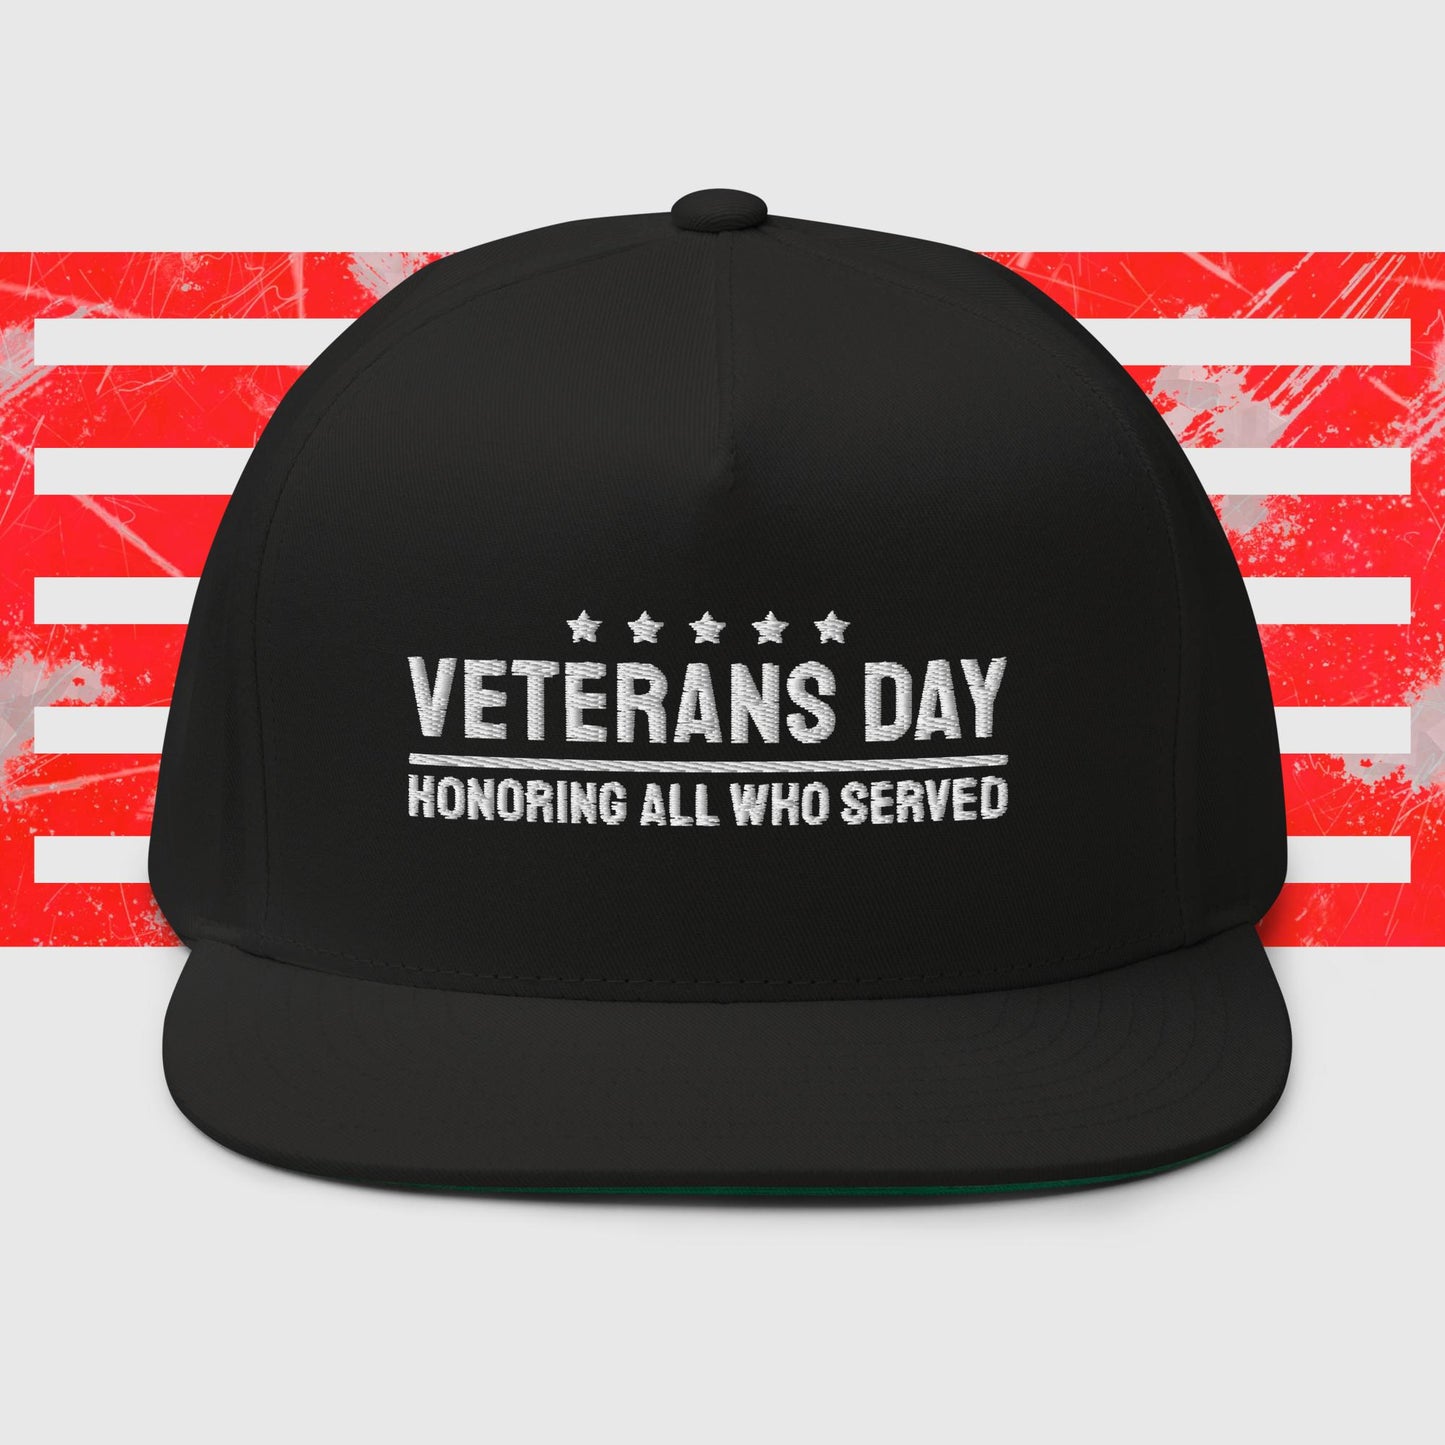 PATRIOTIC CAP VETERANS DAY HONORING ALL WHO SERVED BLACK FRONT - www.firstamericanstore.com